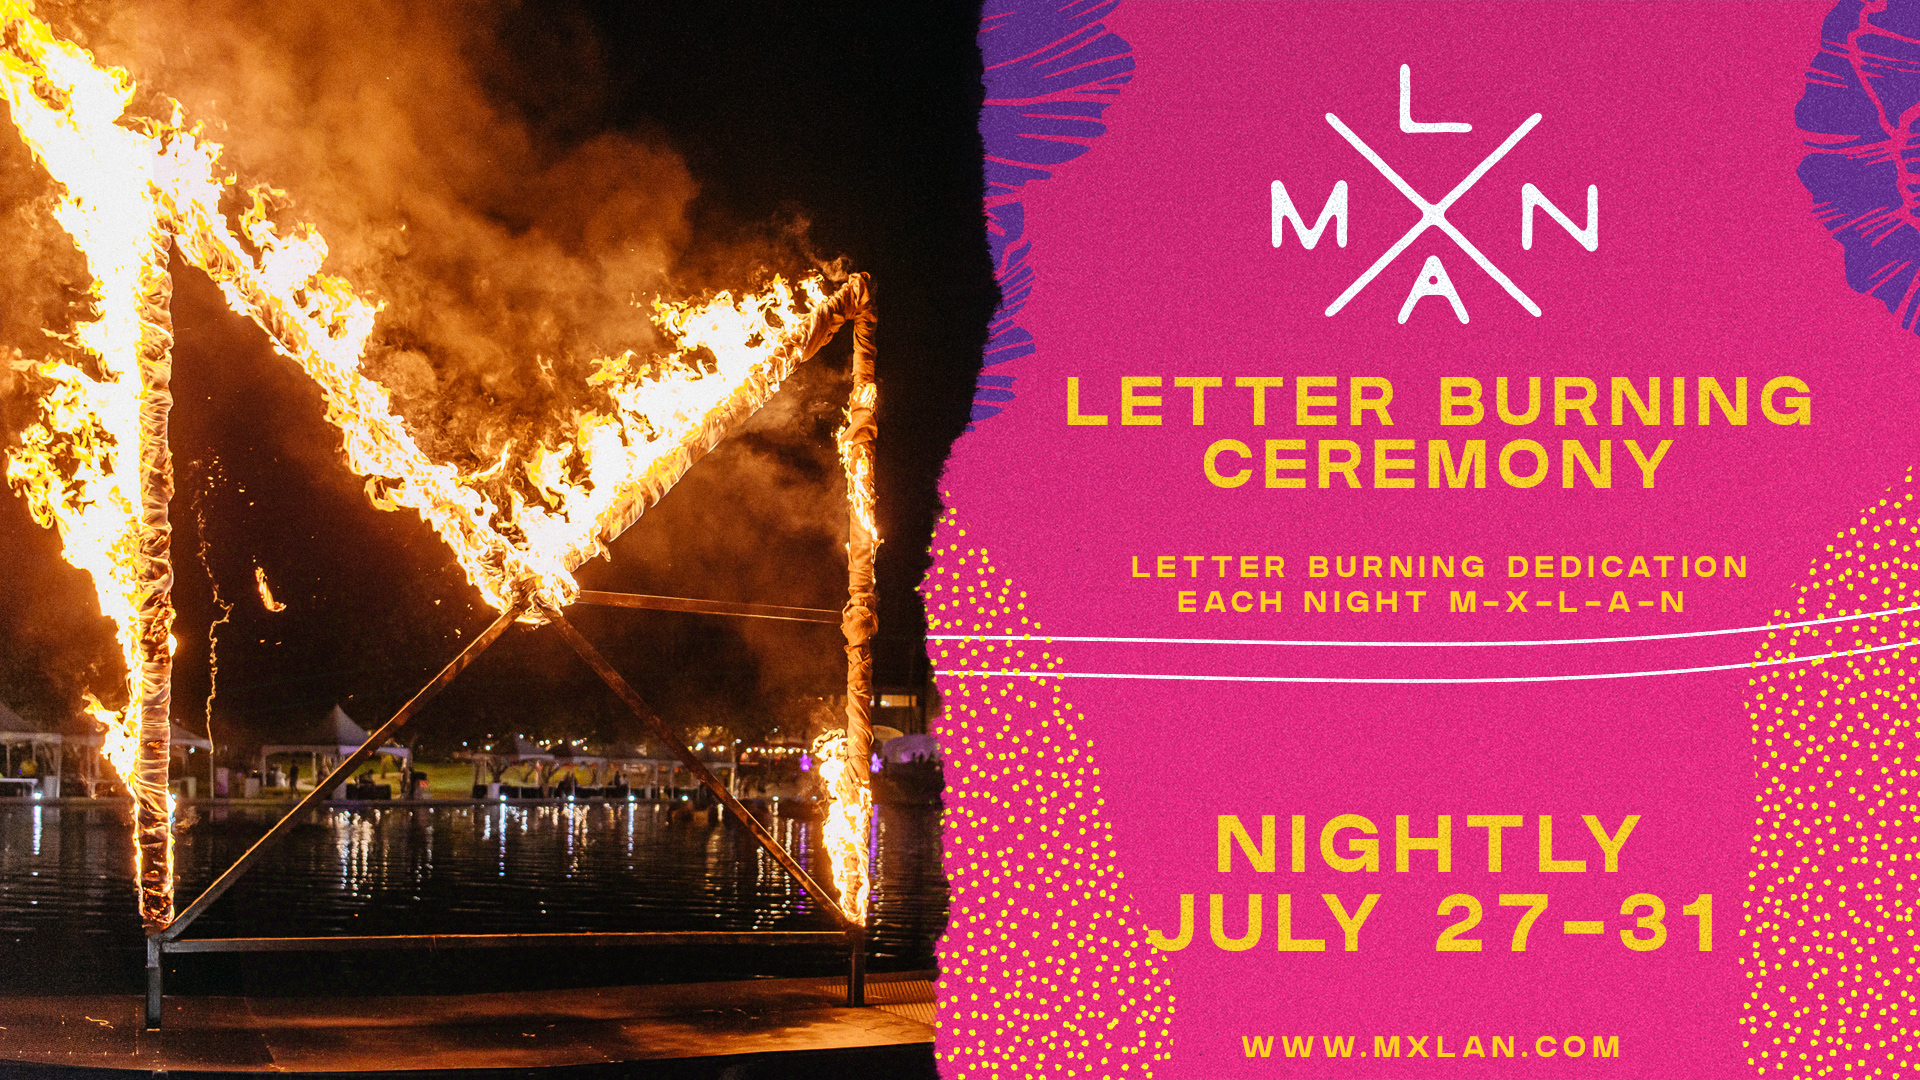 mxlan festival letter burning mcallen latino latinx music arts best fesitval in texas acl south by south west coachella rio grande valley south padre island brownsville indie best latino festival in us breakthrough stage